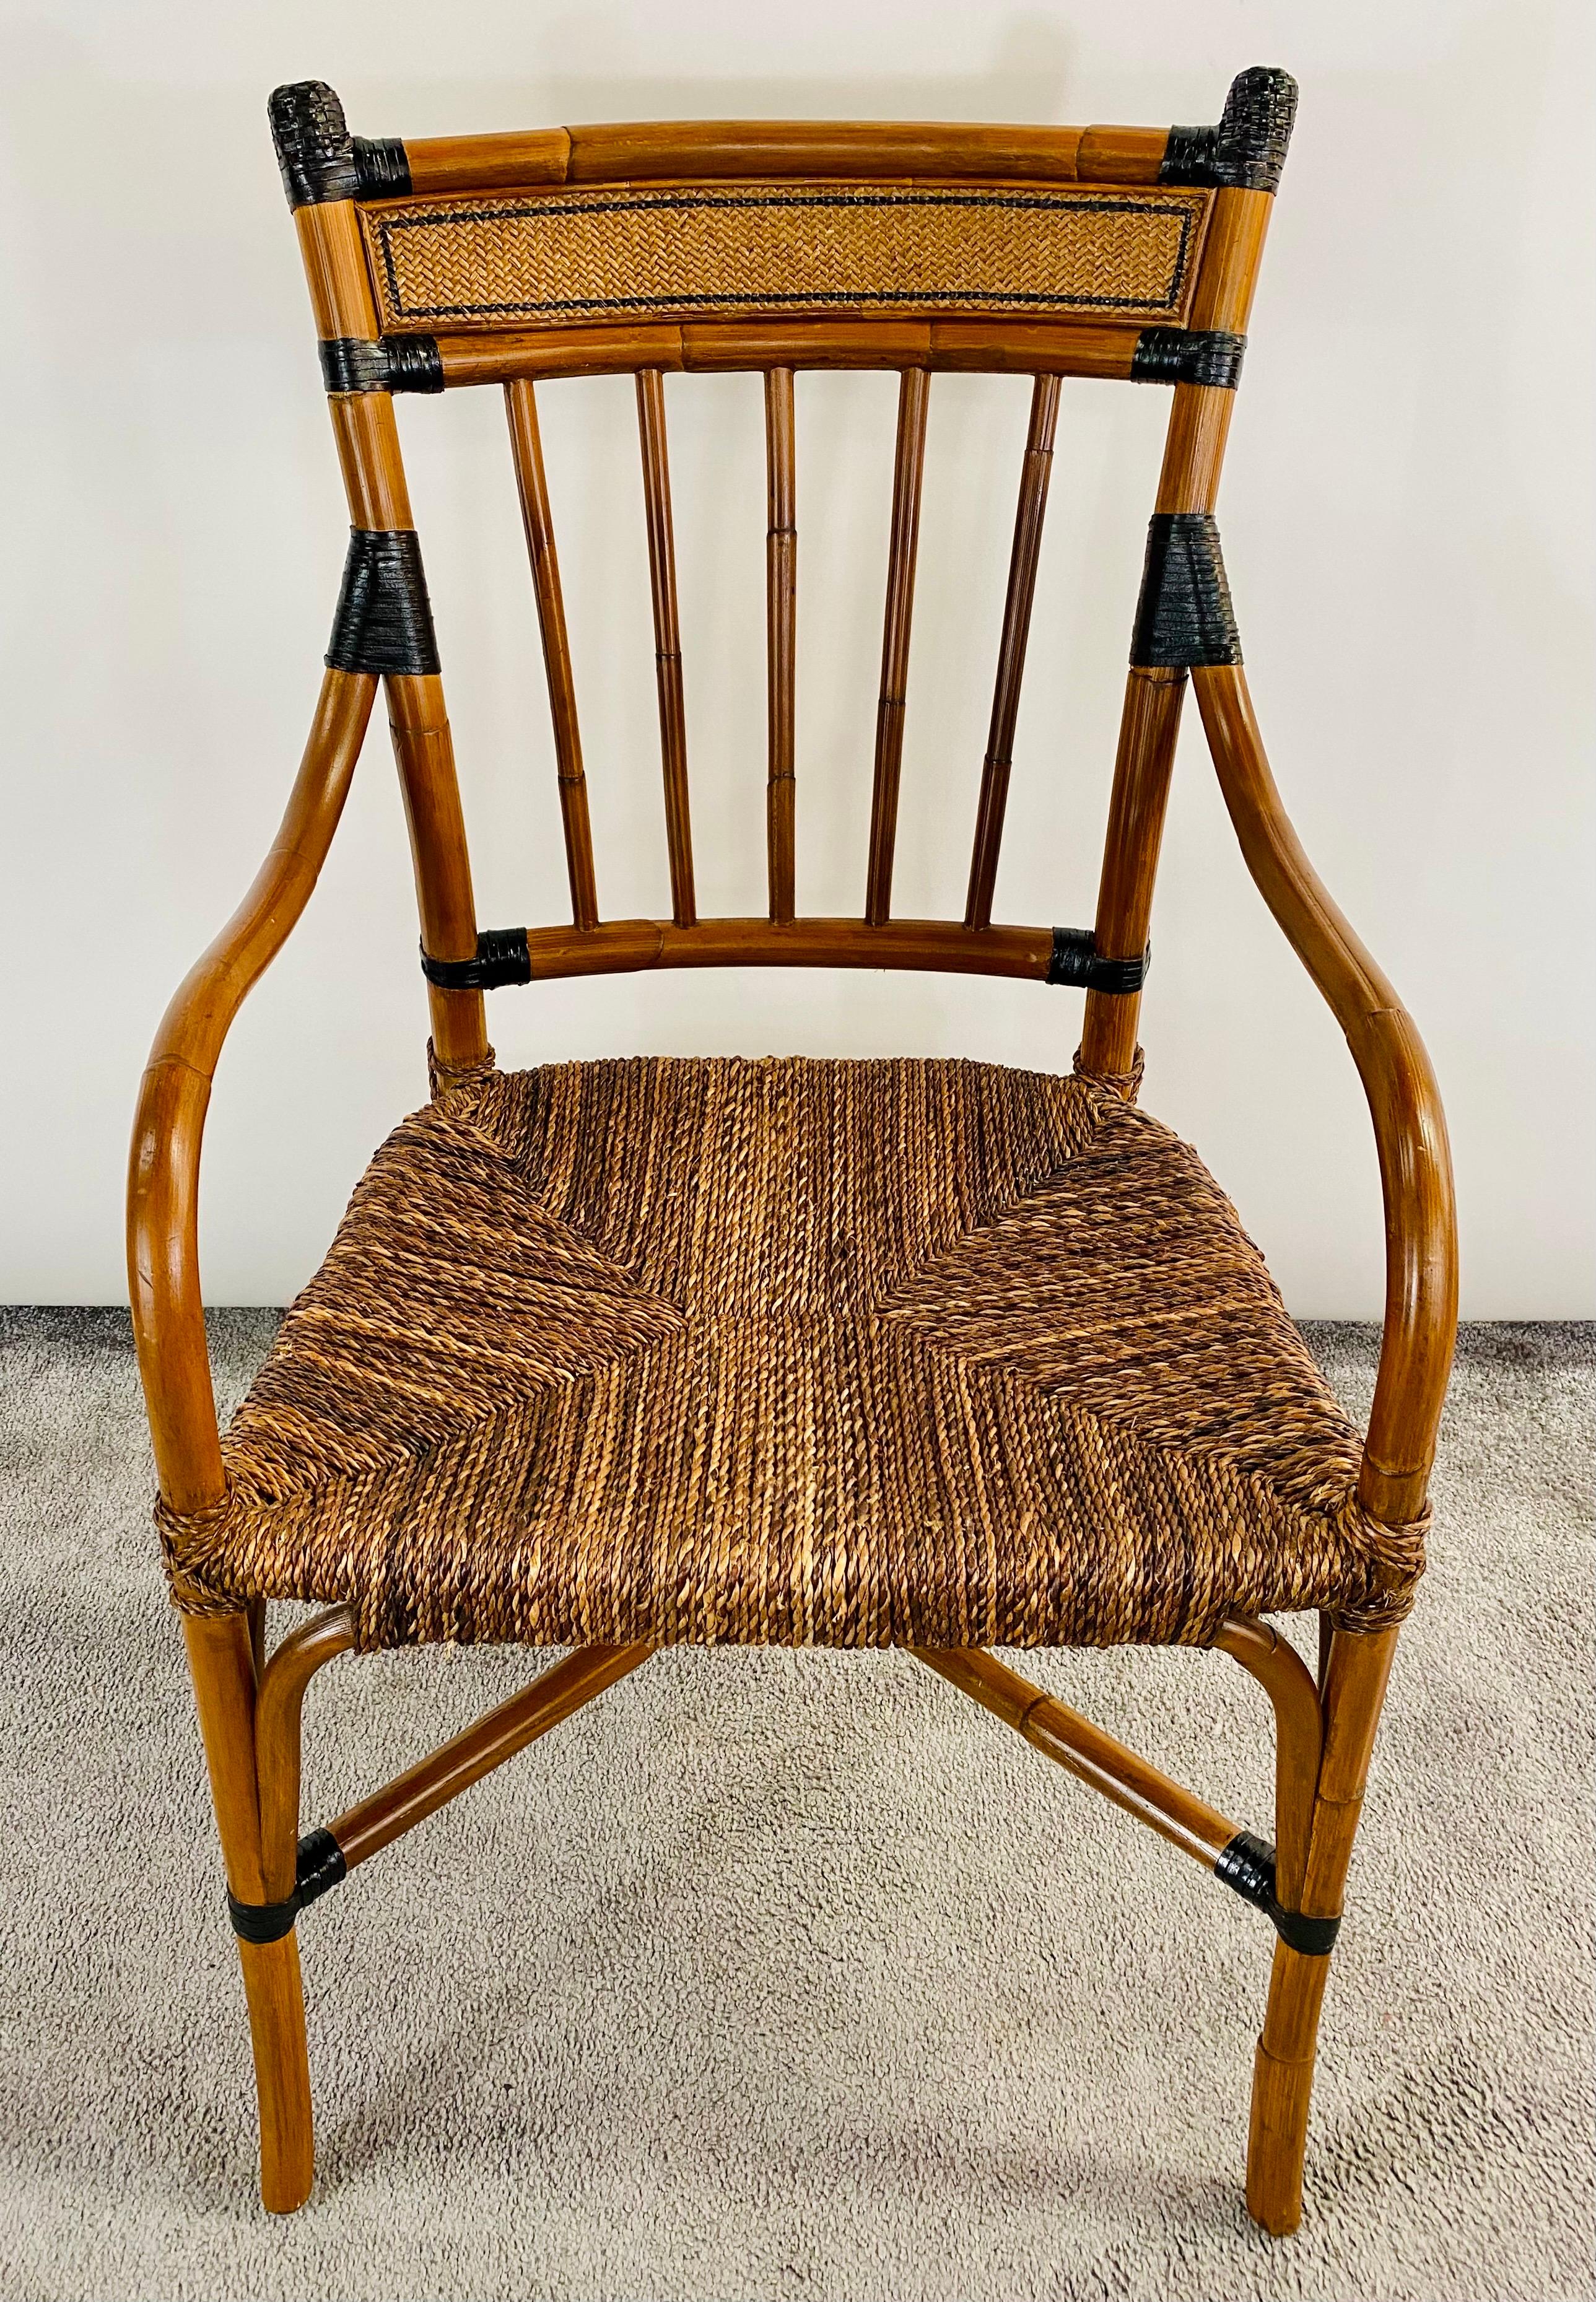 A quality Mid Century Boho Chic faux bamboo and Rattan armchair. Finely carved , the chair features curved arms resting on a rattan seat. The back of the chair is slightly curved providing additional comfort and embellished with rattan and black